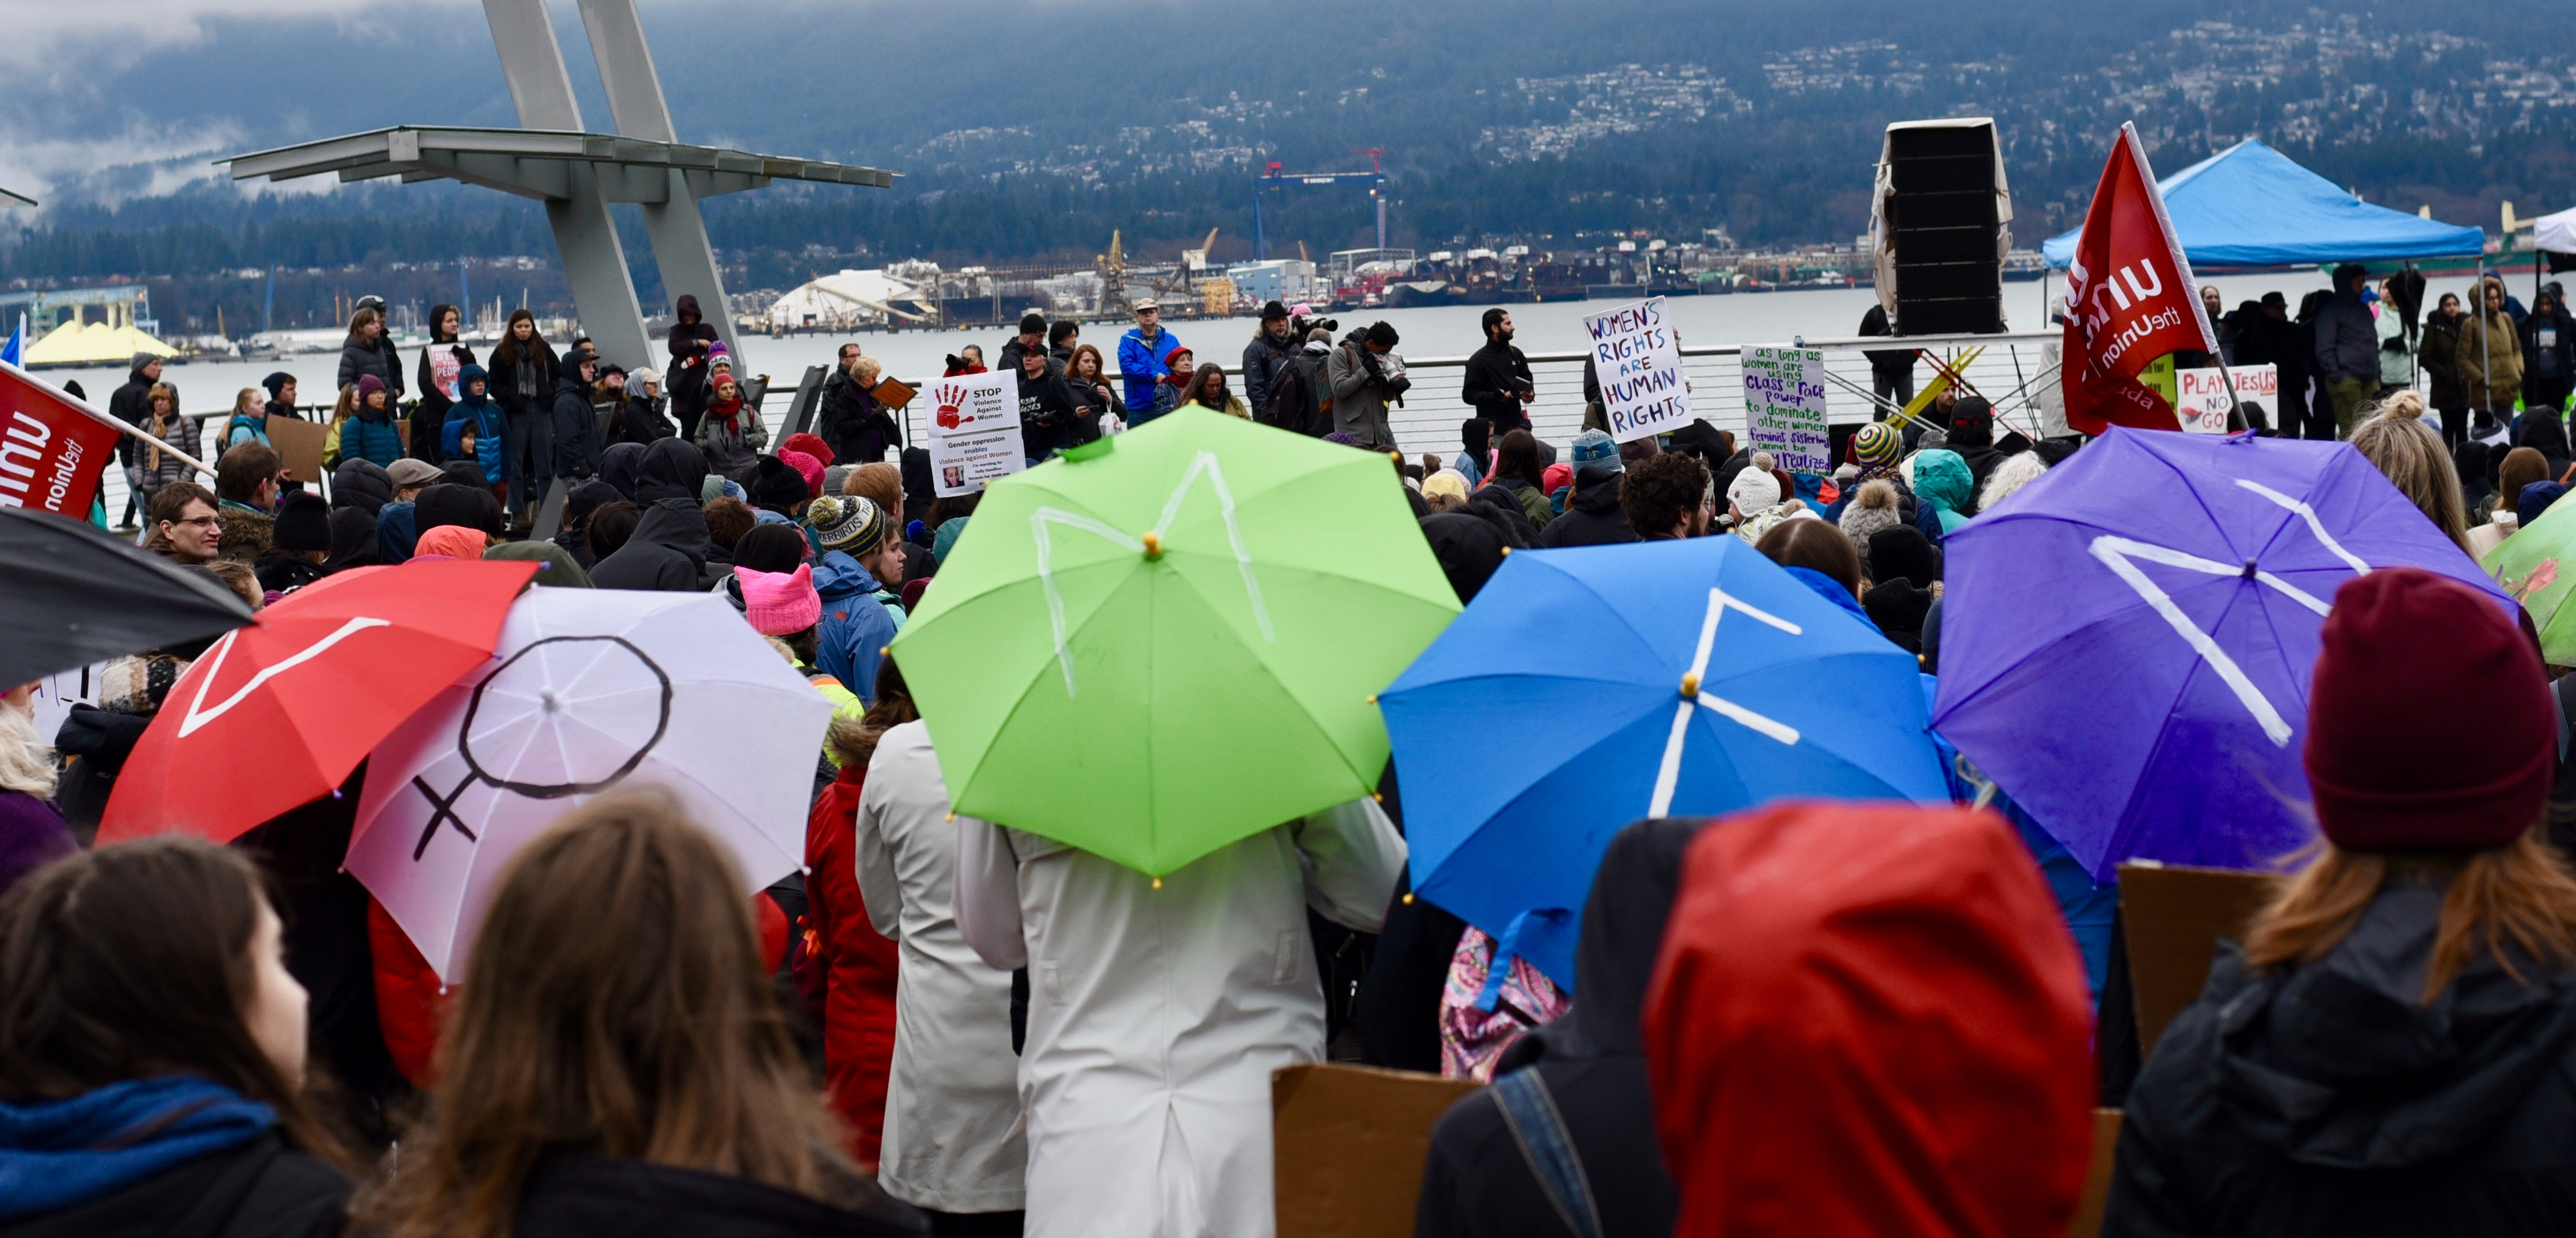 Demonstrators at Jack Poole plaza spell out "WOMEN" with their umbrellas.